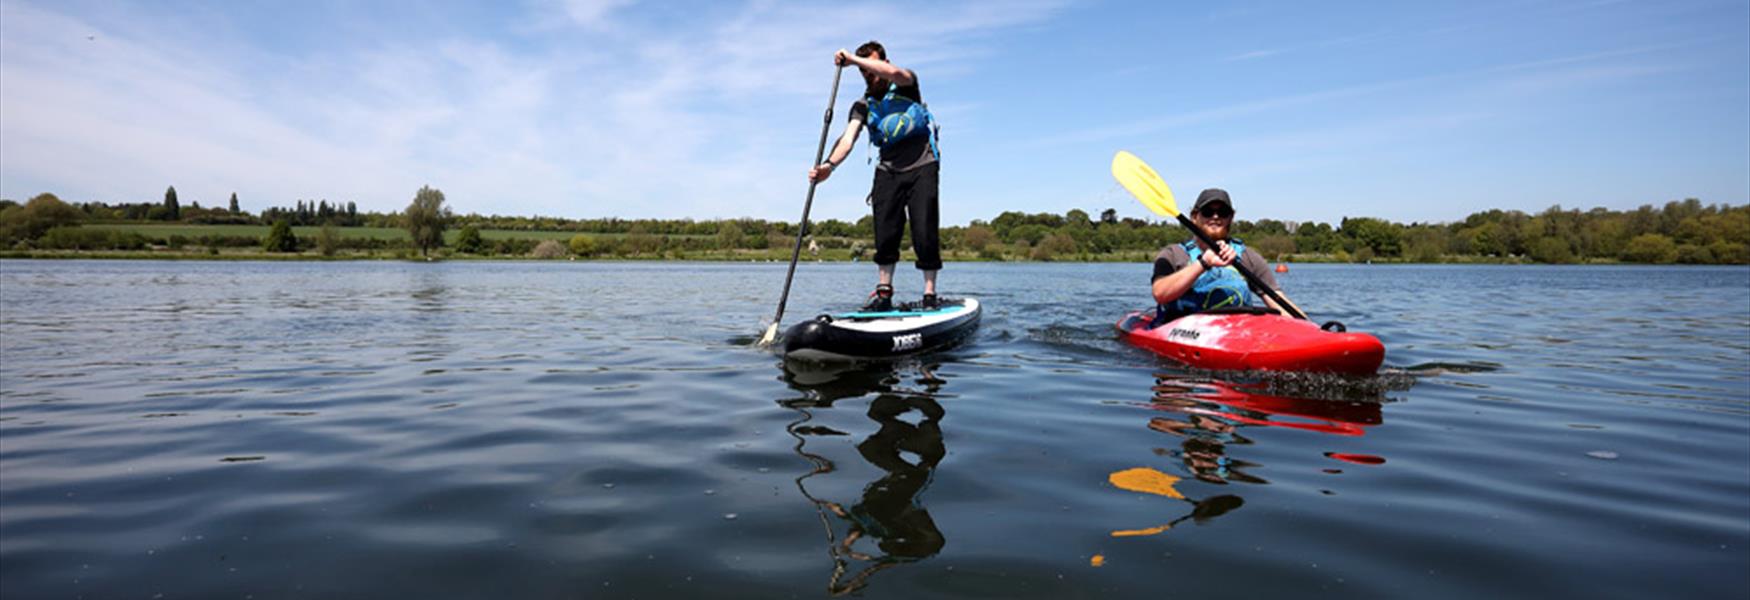 Paddleboarding at Ferry Meadows